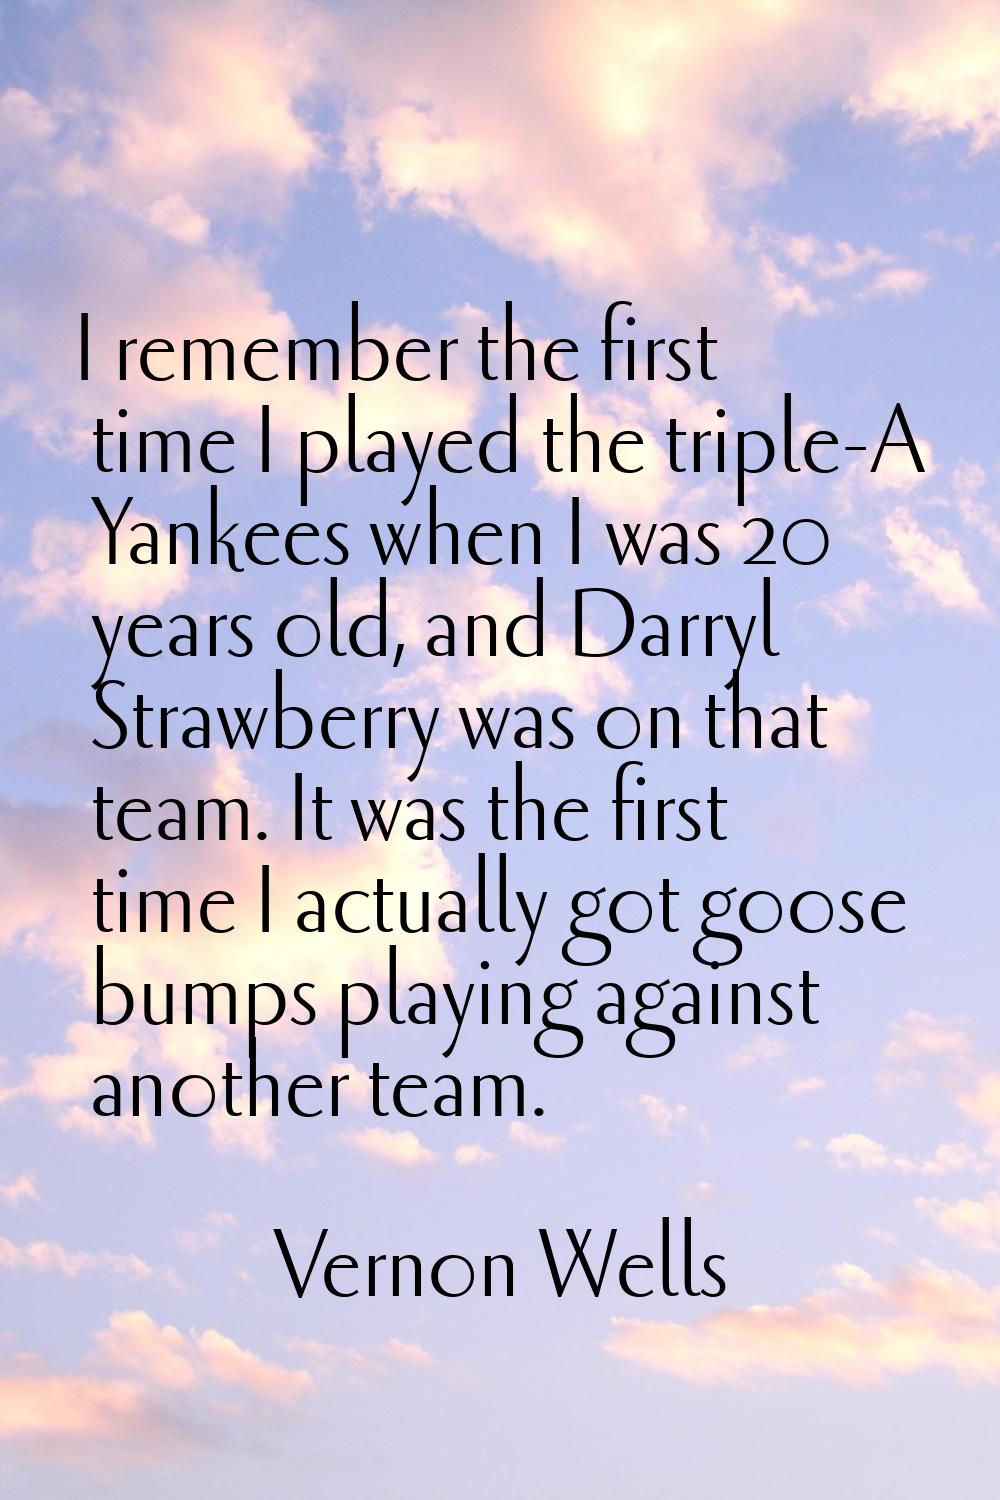 I remember the first time I played the triple-A Yankees when I was 20 years old, and Darryl Strawbe